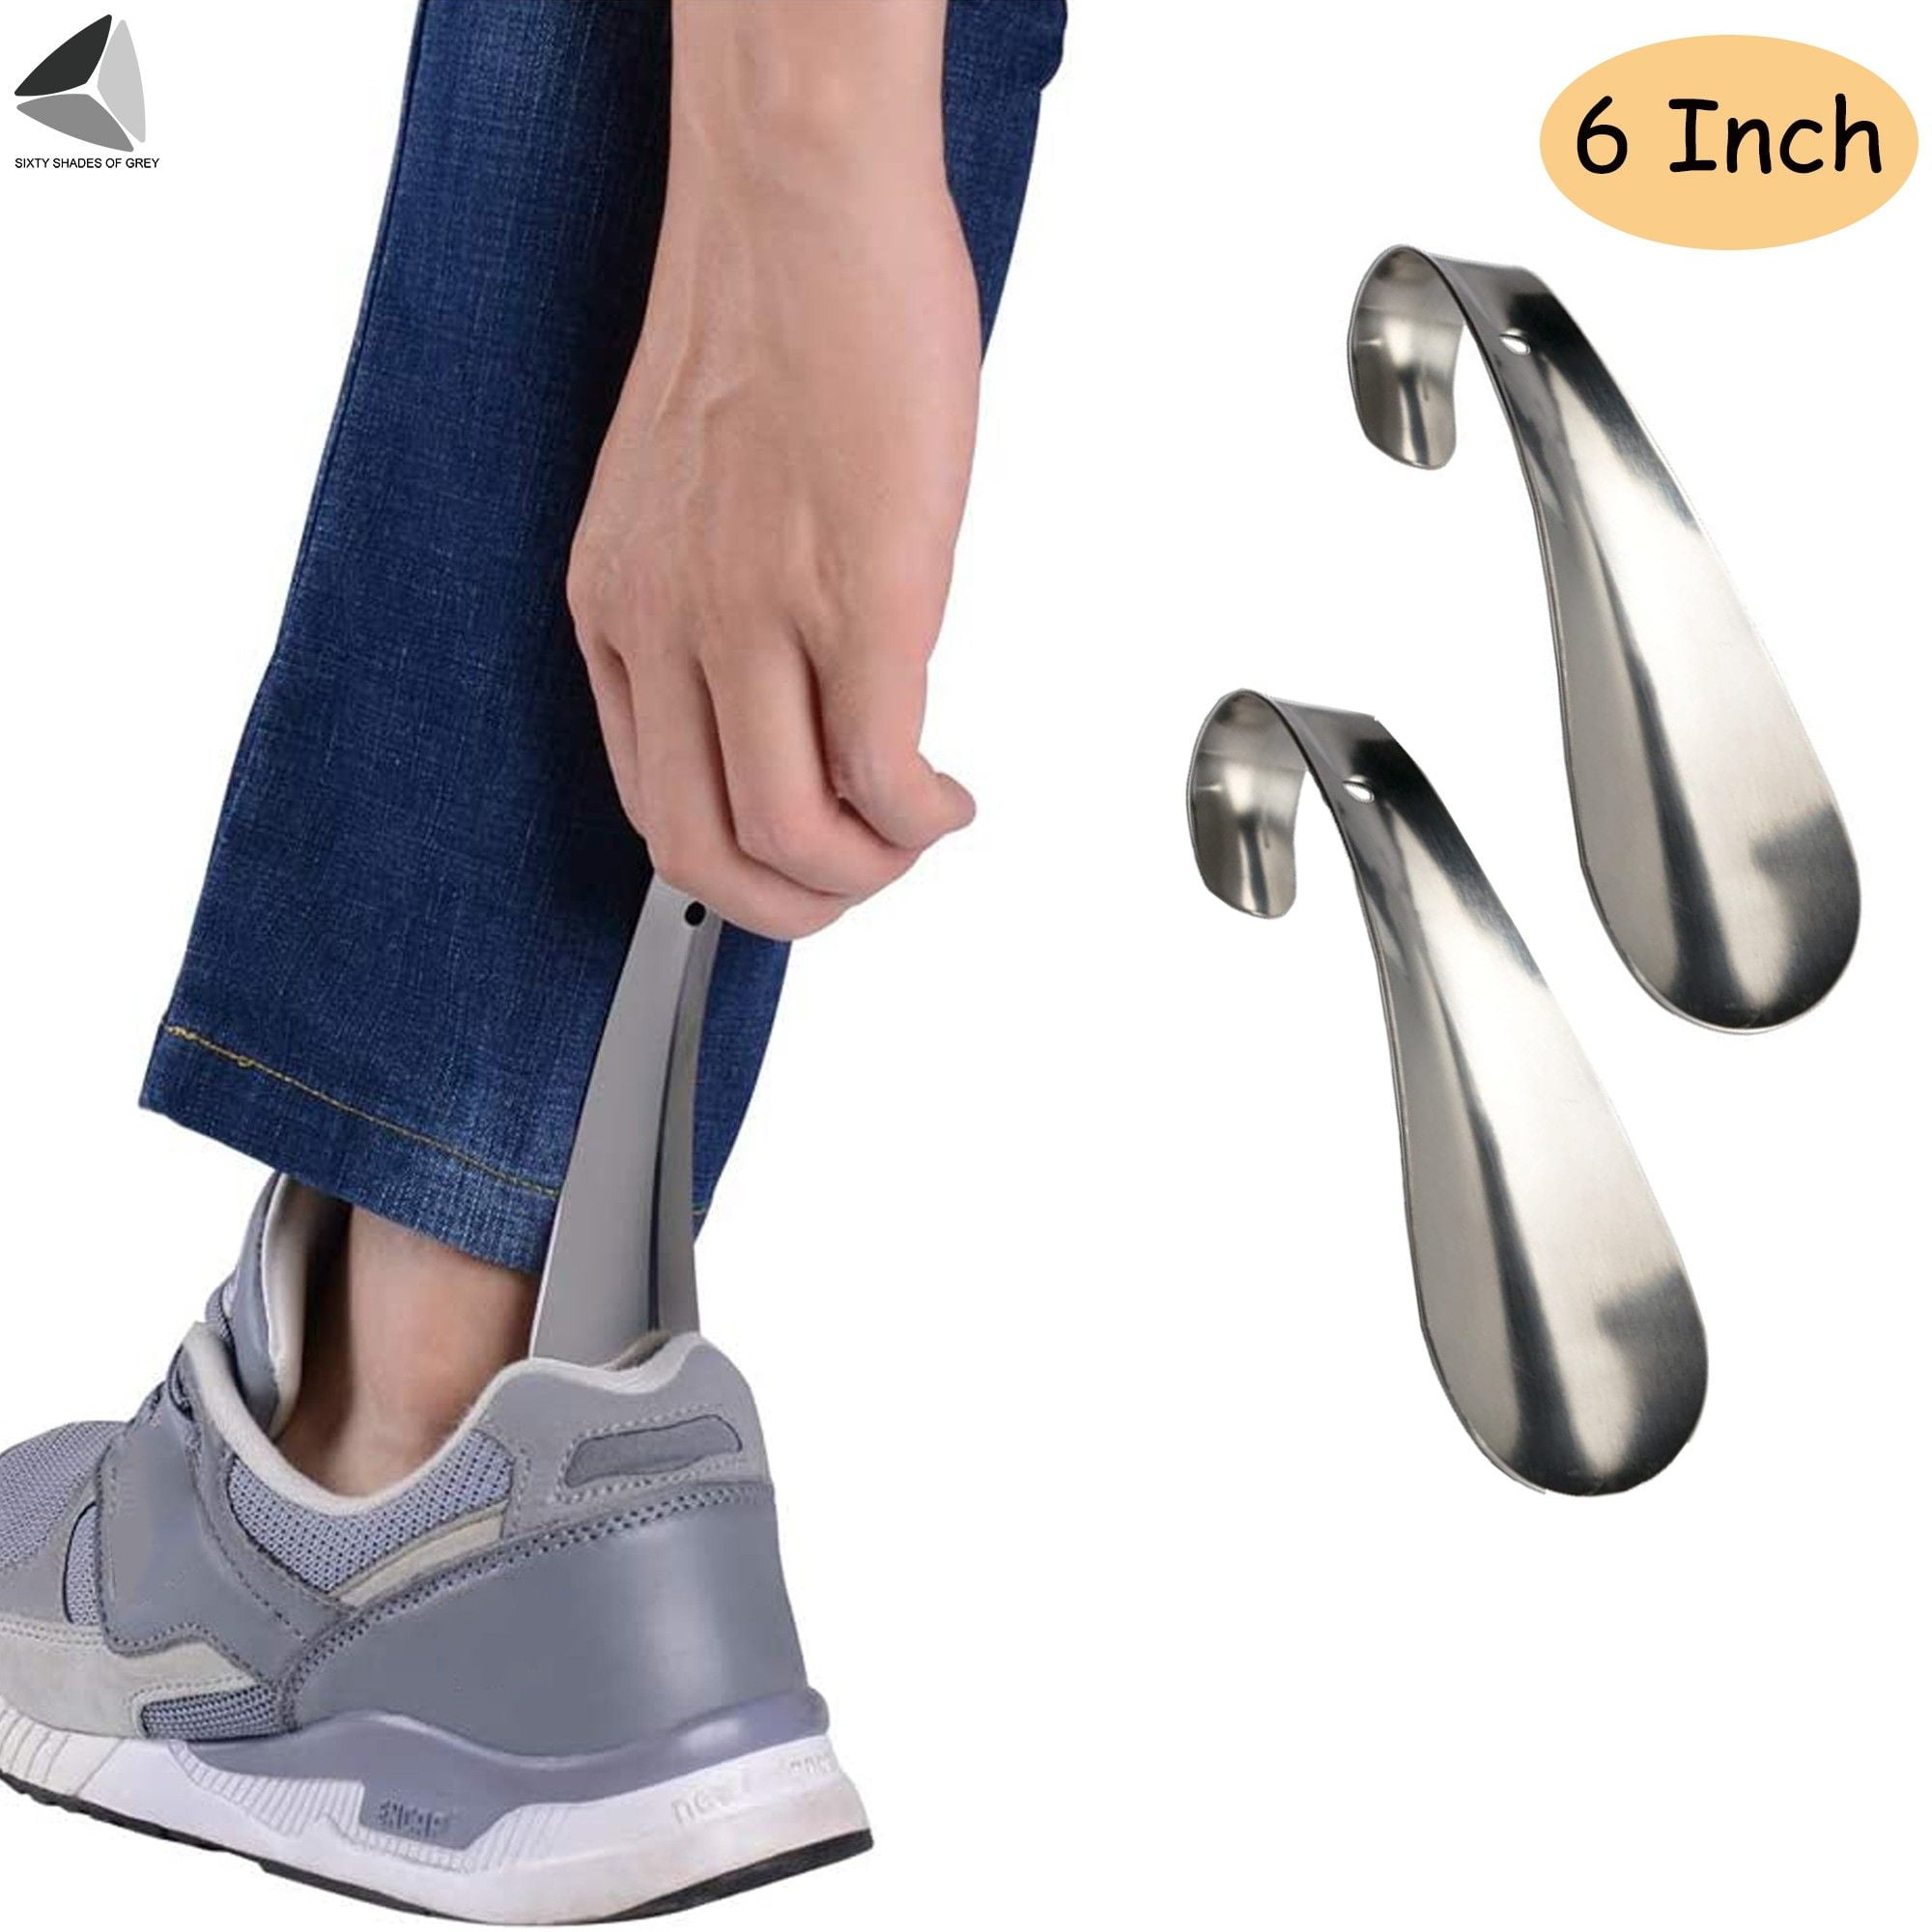 41cm Shoe Horn Long Handled Made By Stainless Steel Designed for Seniors Pregnancy & People with Back Pain 17-inch 